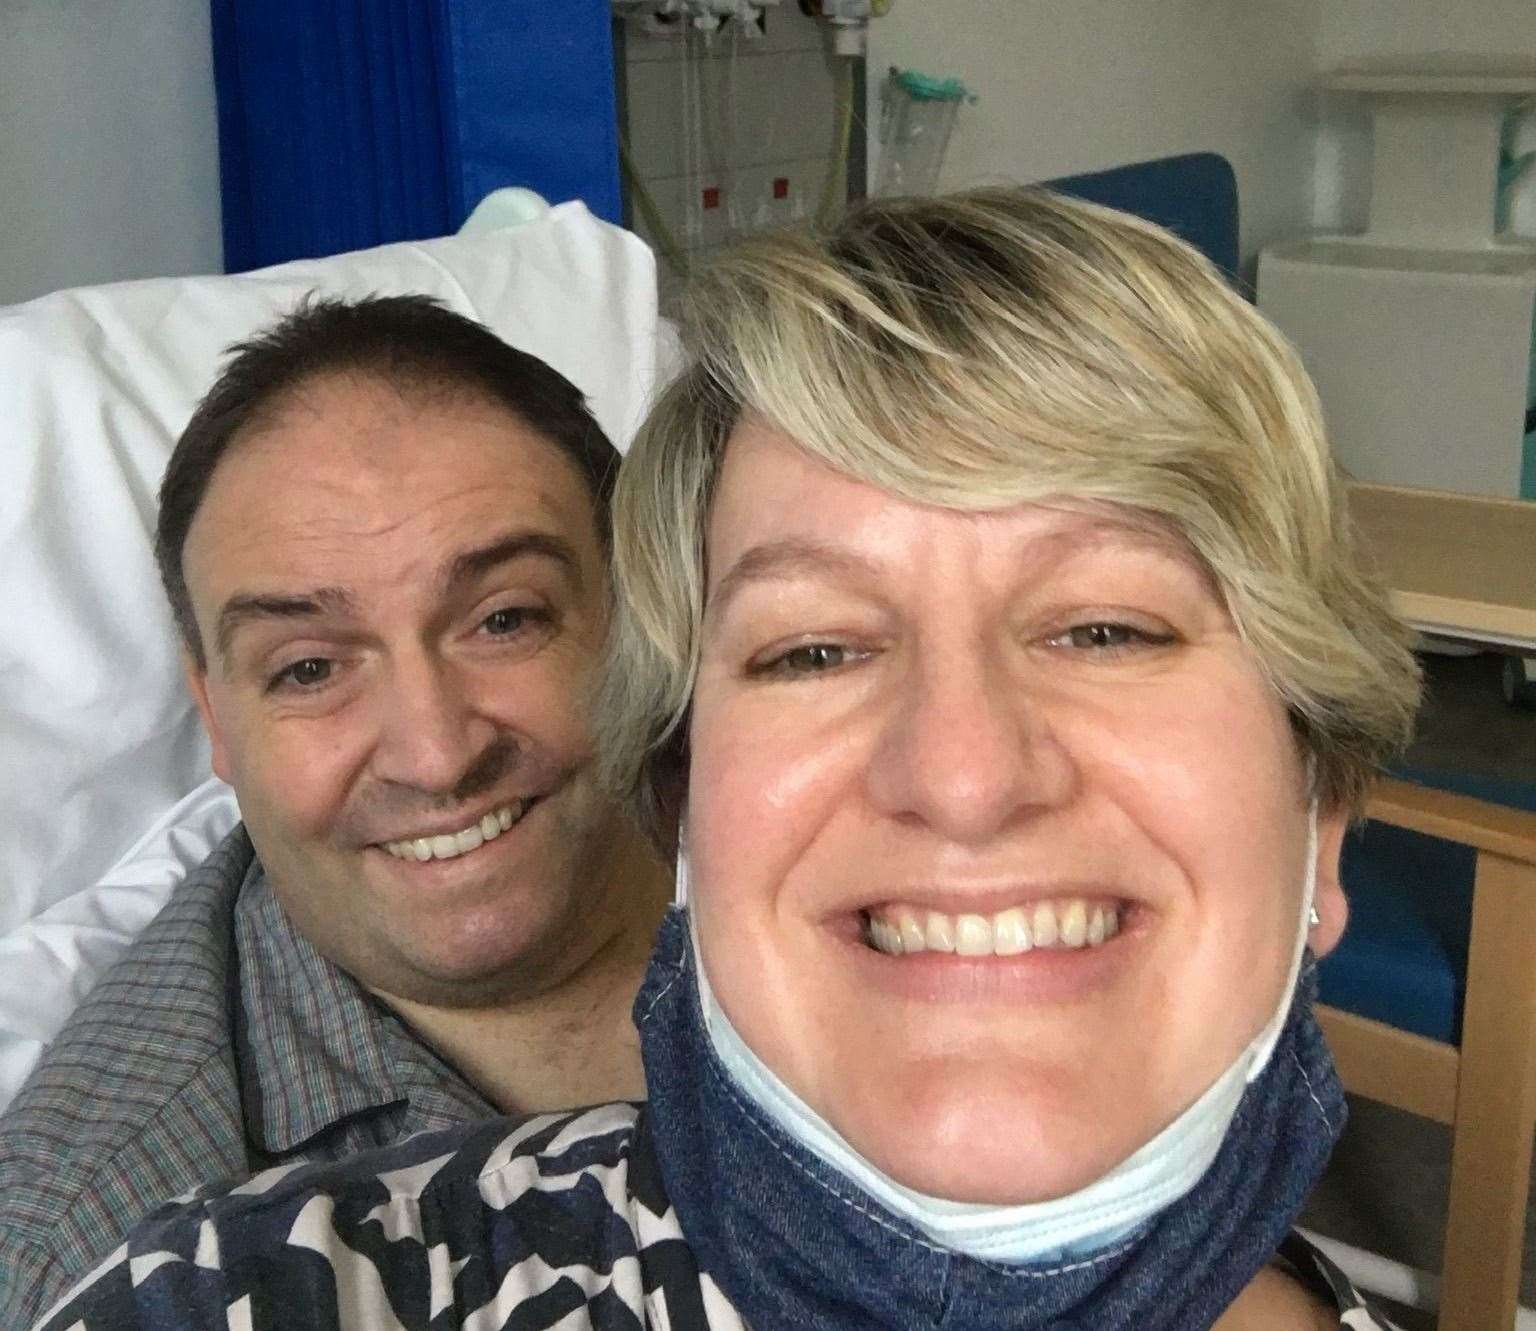 From left: Giles and Chrissie when he was in the hospital. Picture: Giles Phillips/KSS